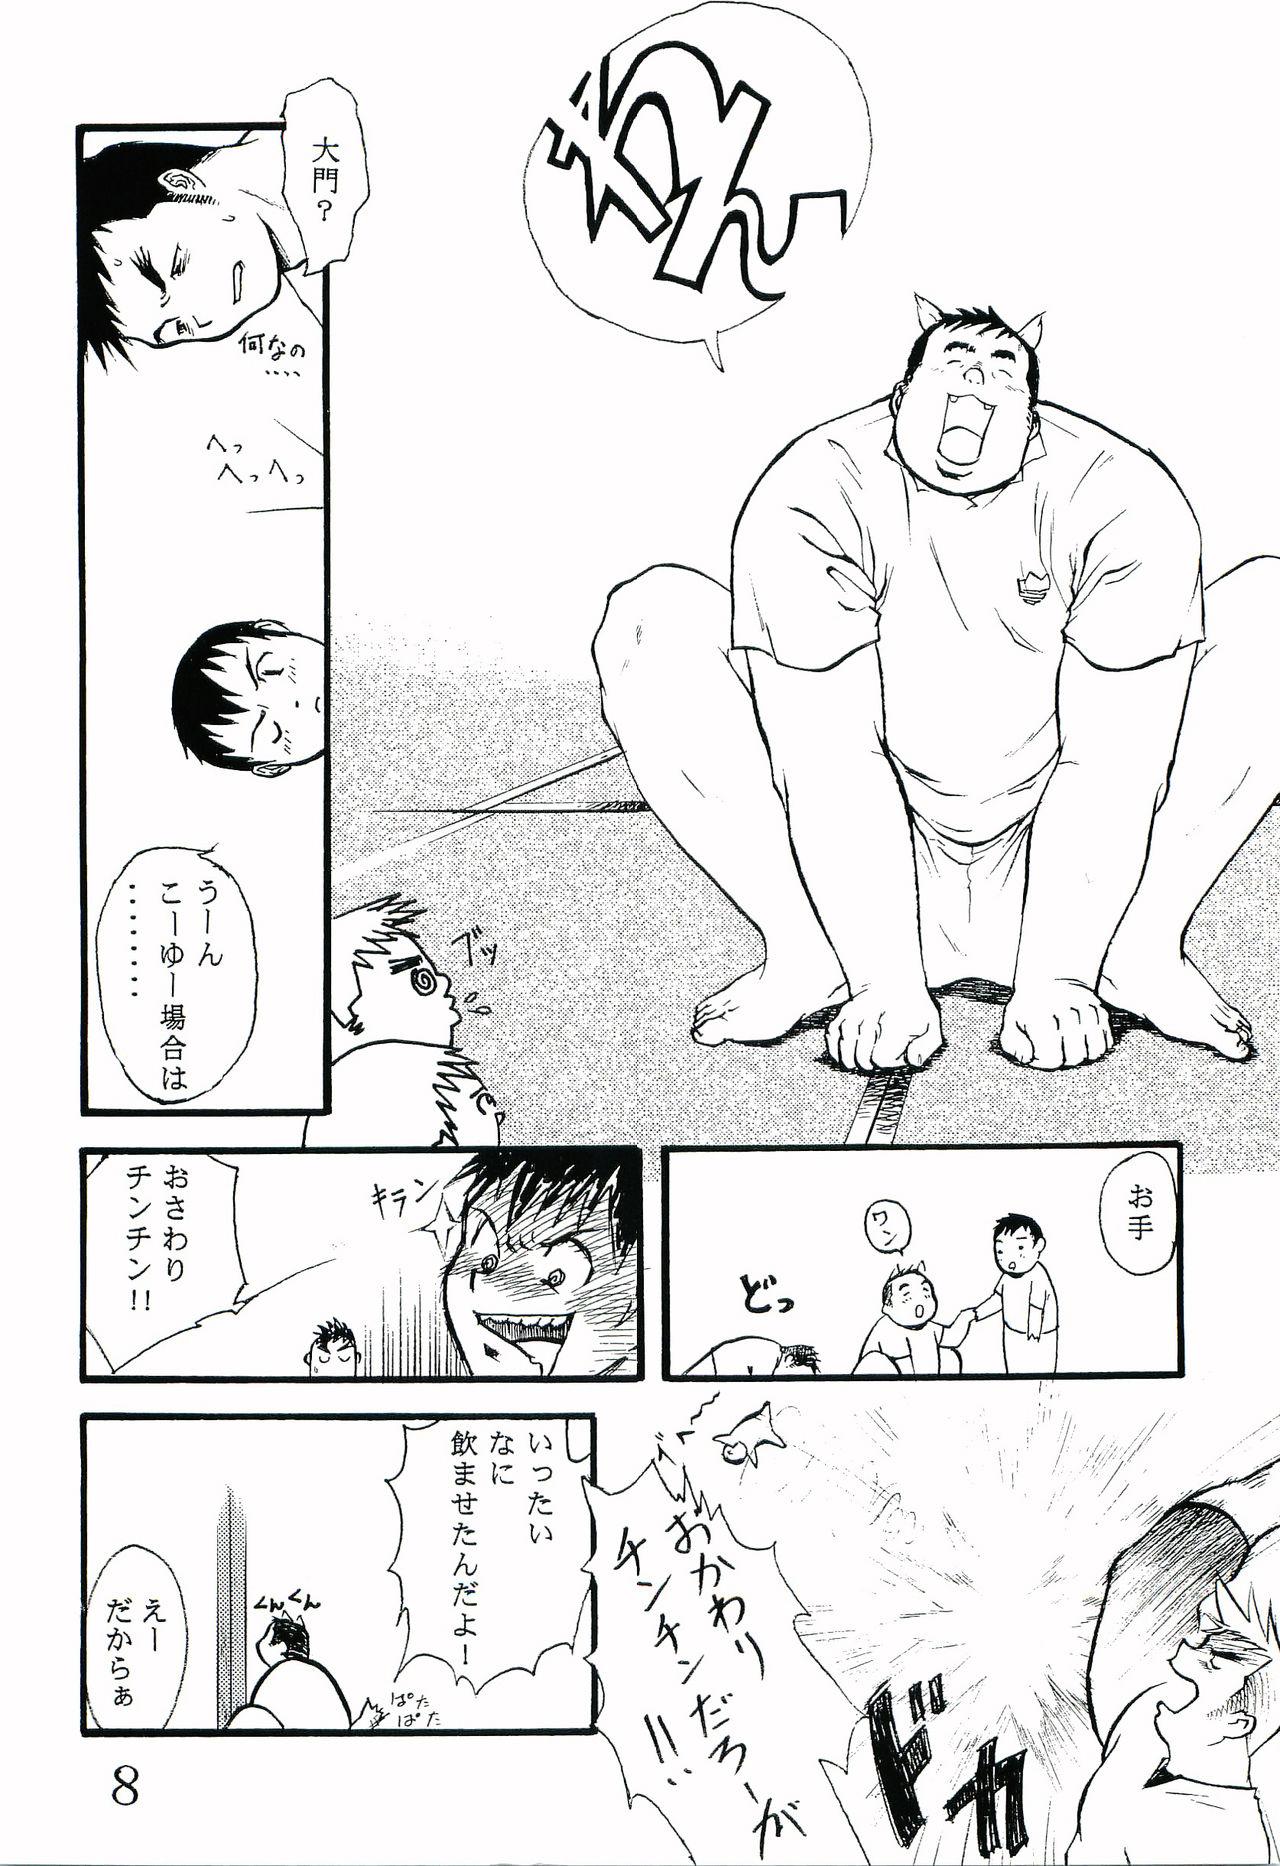 Village Dai Inu - King of fighters Erotic - Page 7